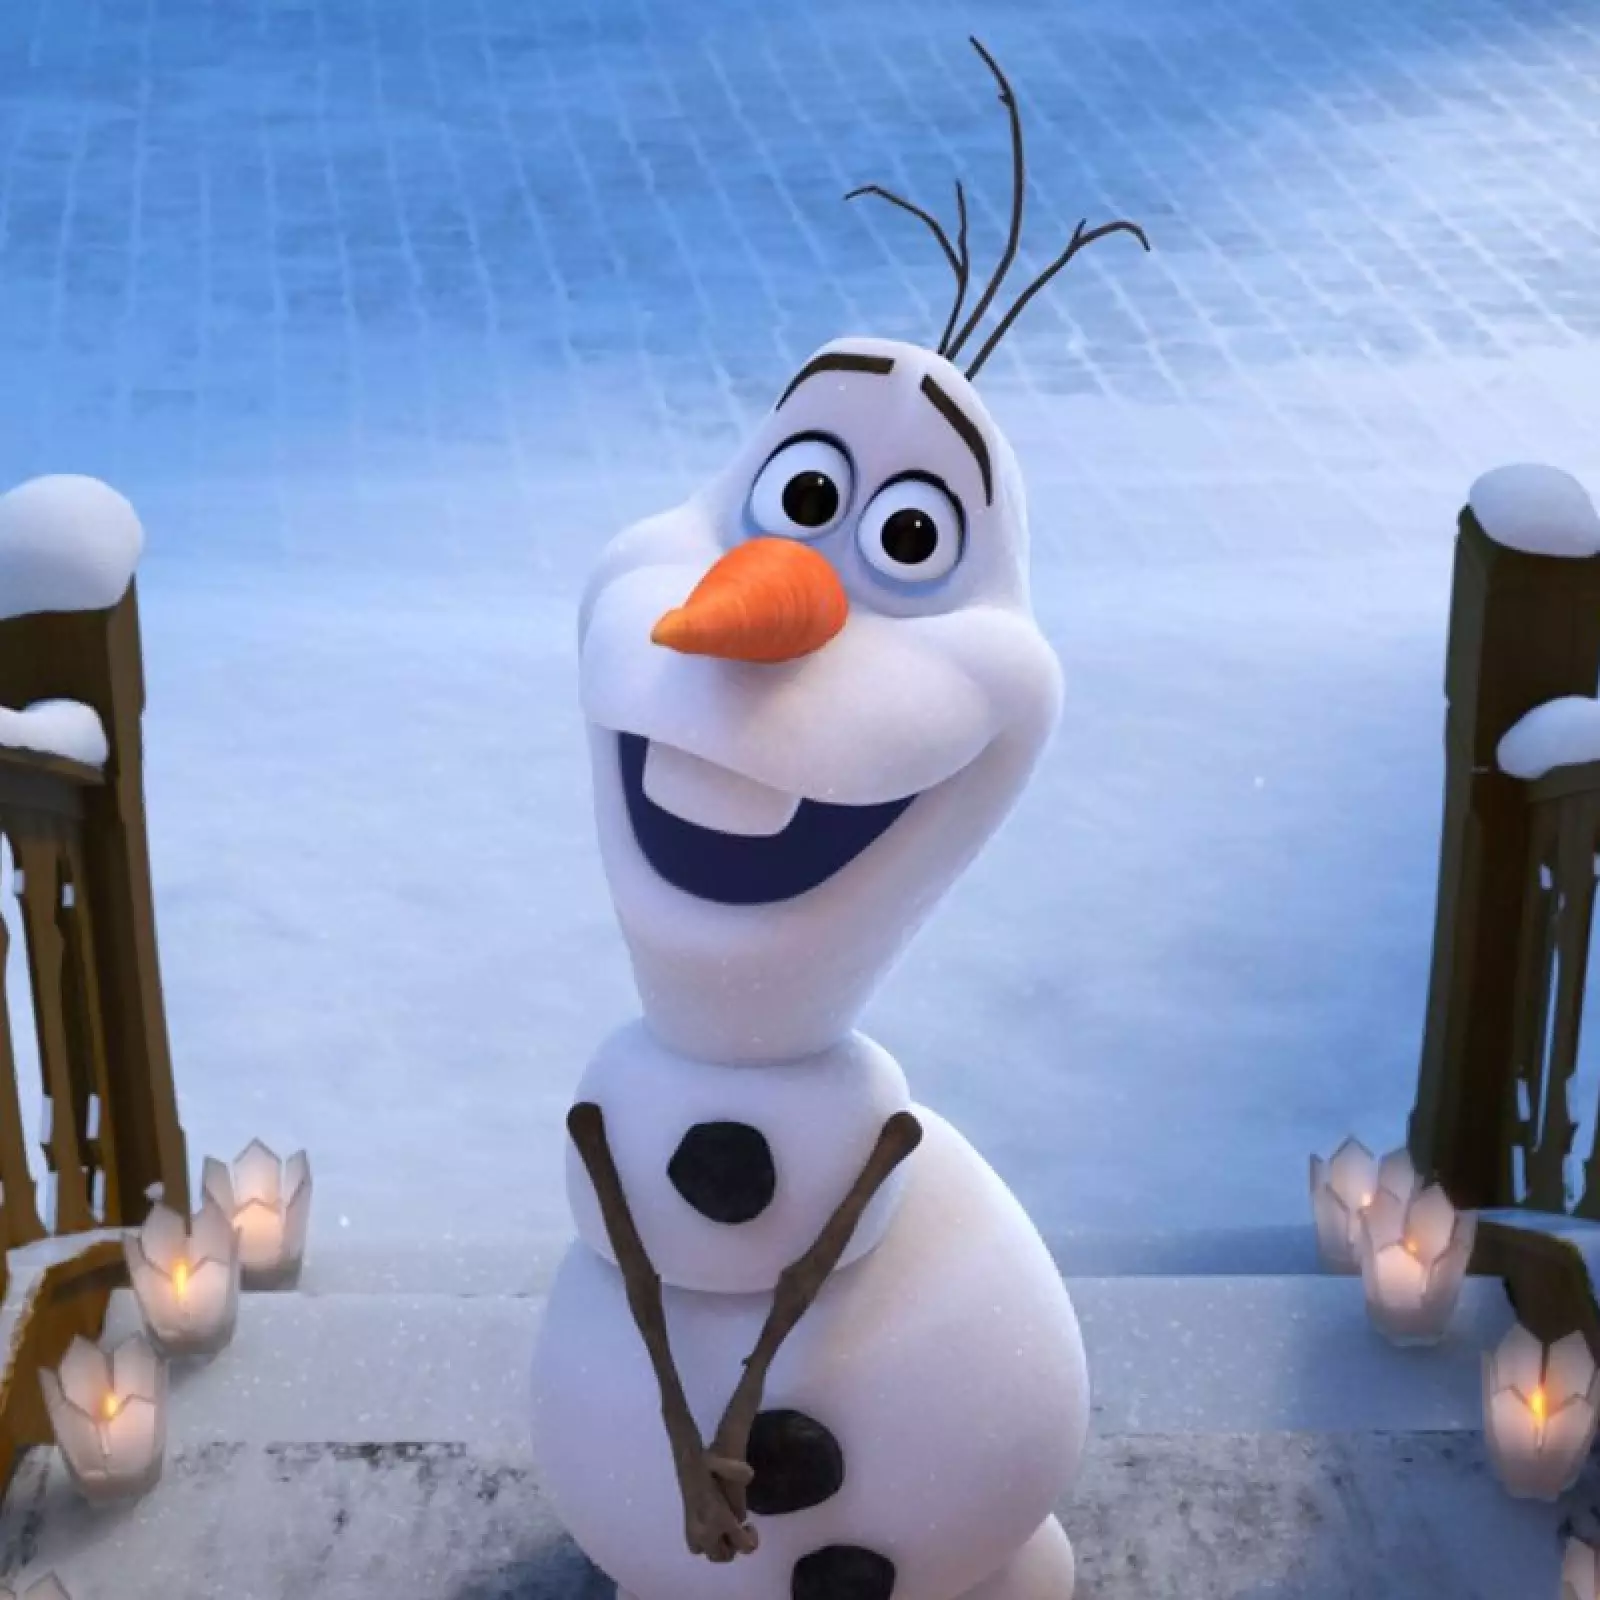 The short will focus on Olaf (